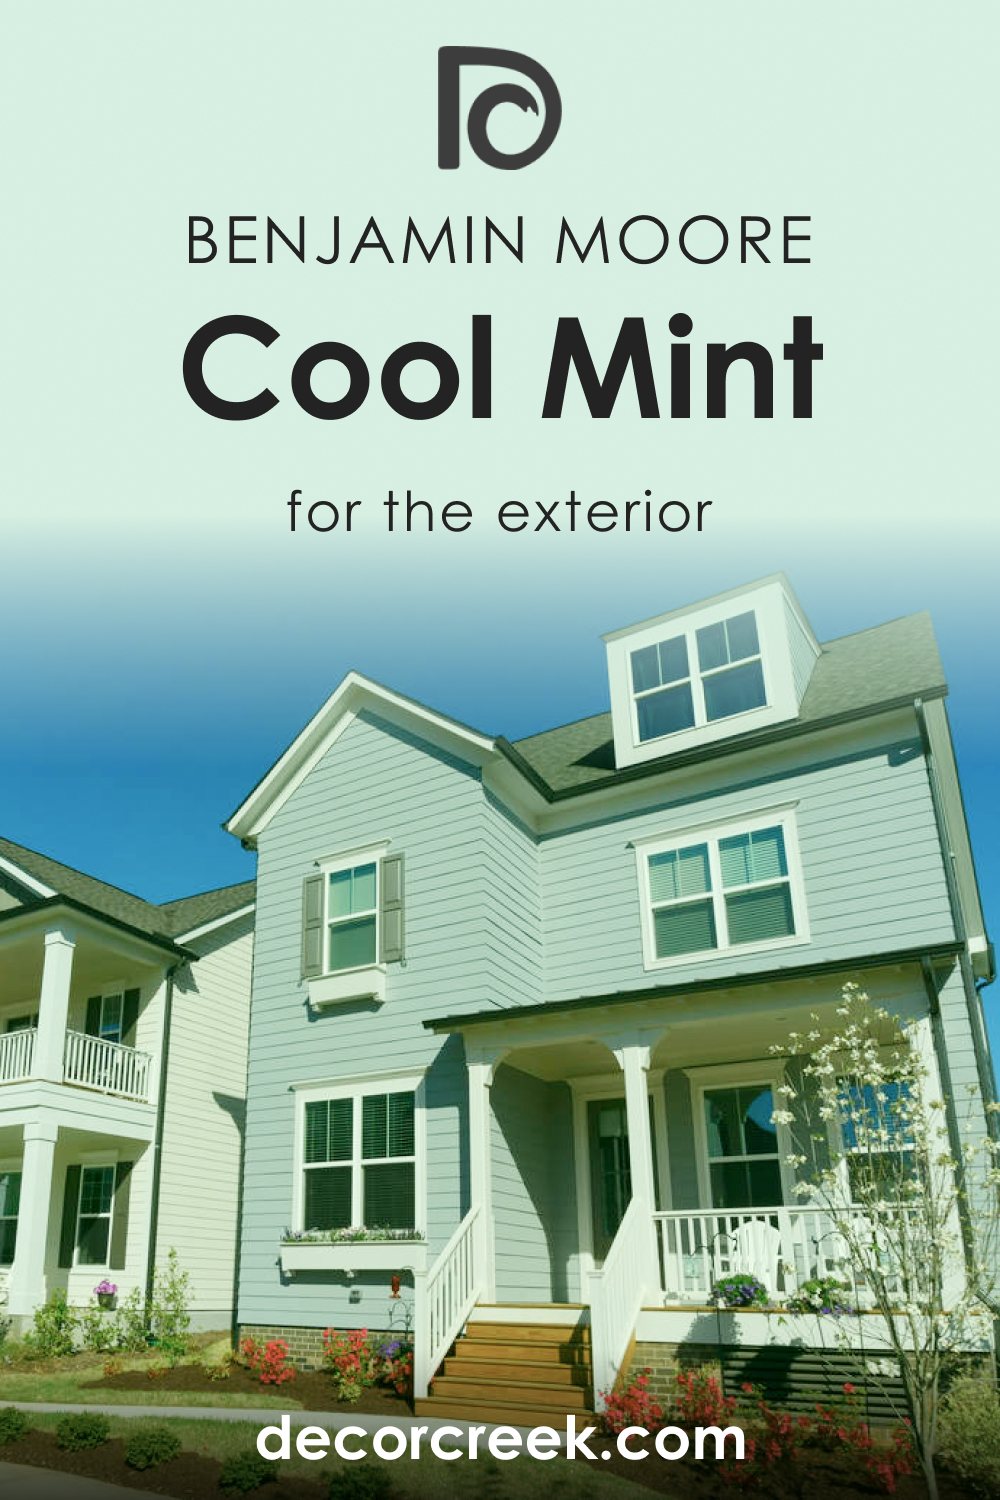 How to Use Cool Mint 582 for an Exterior?